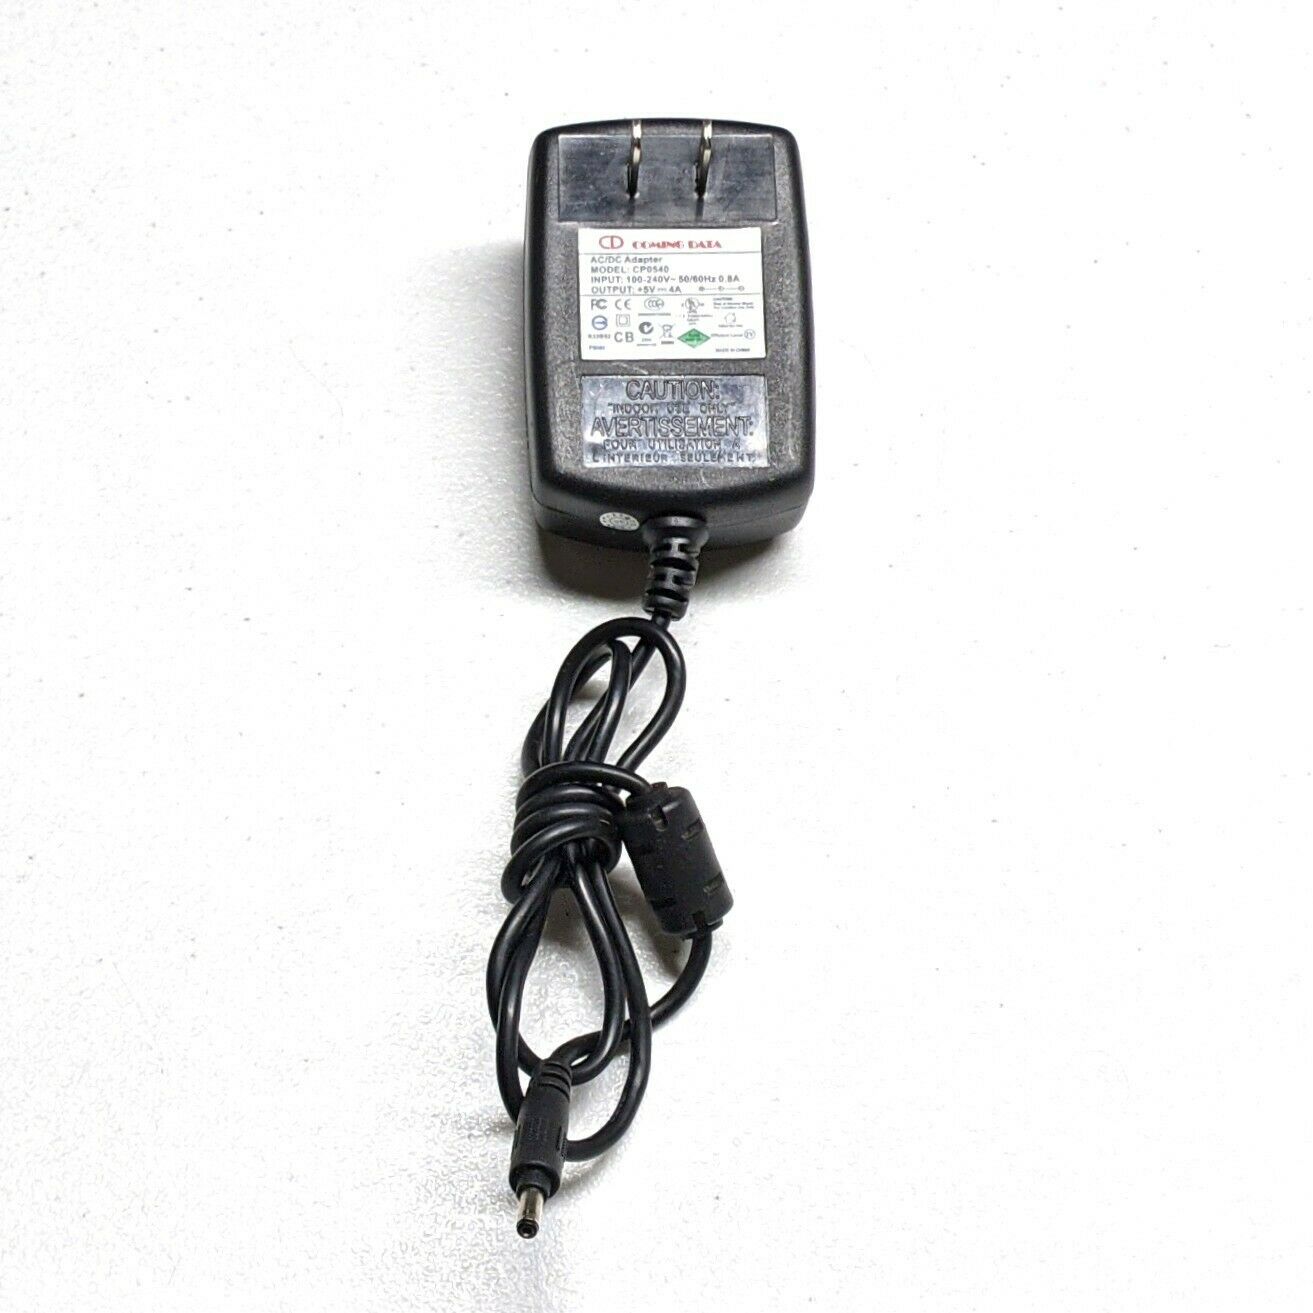 OEM Coming Data CP0540 AC Power Adapter 5v 4a 20w 5volt 4amp charger 3.5mm/1.5mm Brand: Coming Data Type: AC/DC Adap